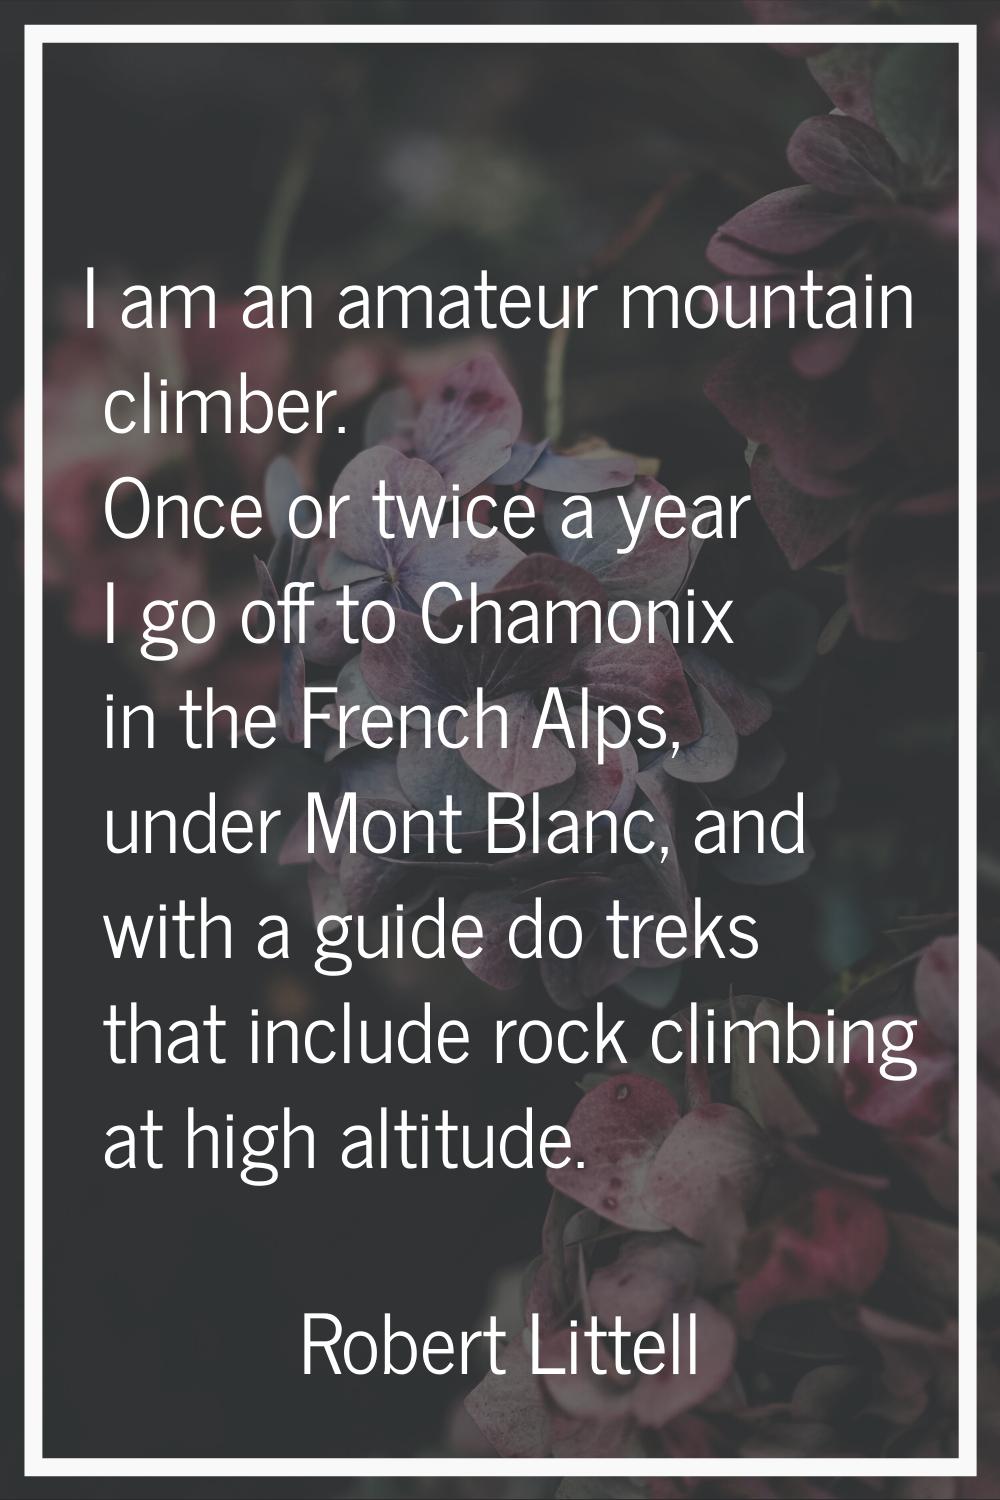 I am an amateur mountain climber. Once or twice a year I go off to Chamonix in the French Alps, und